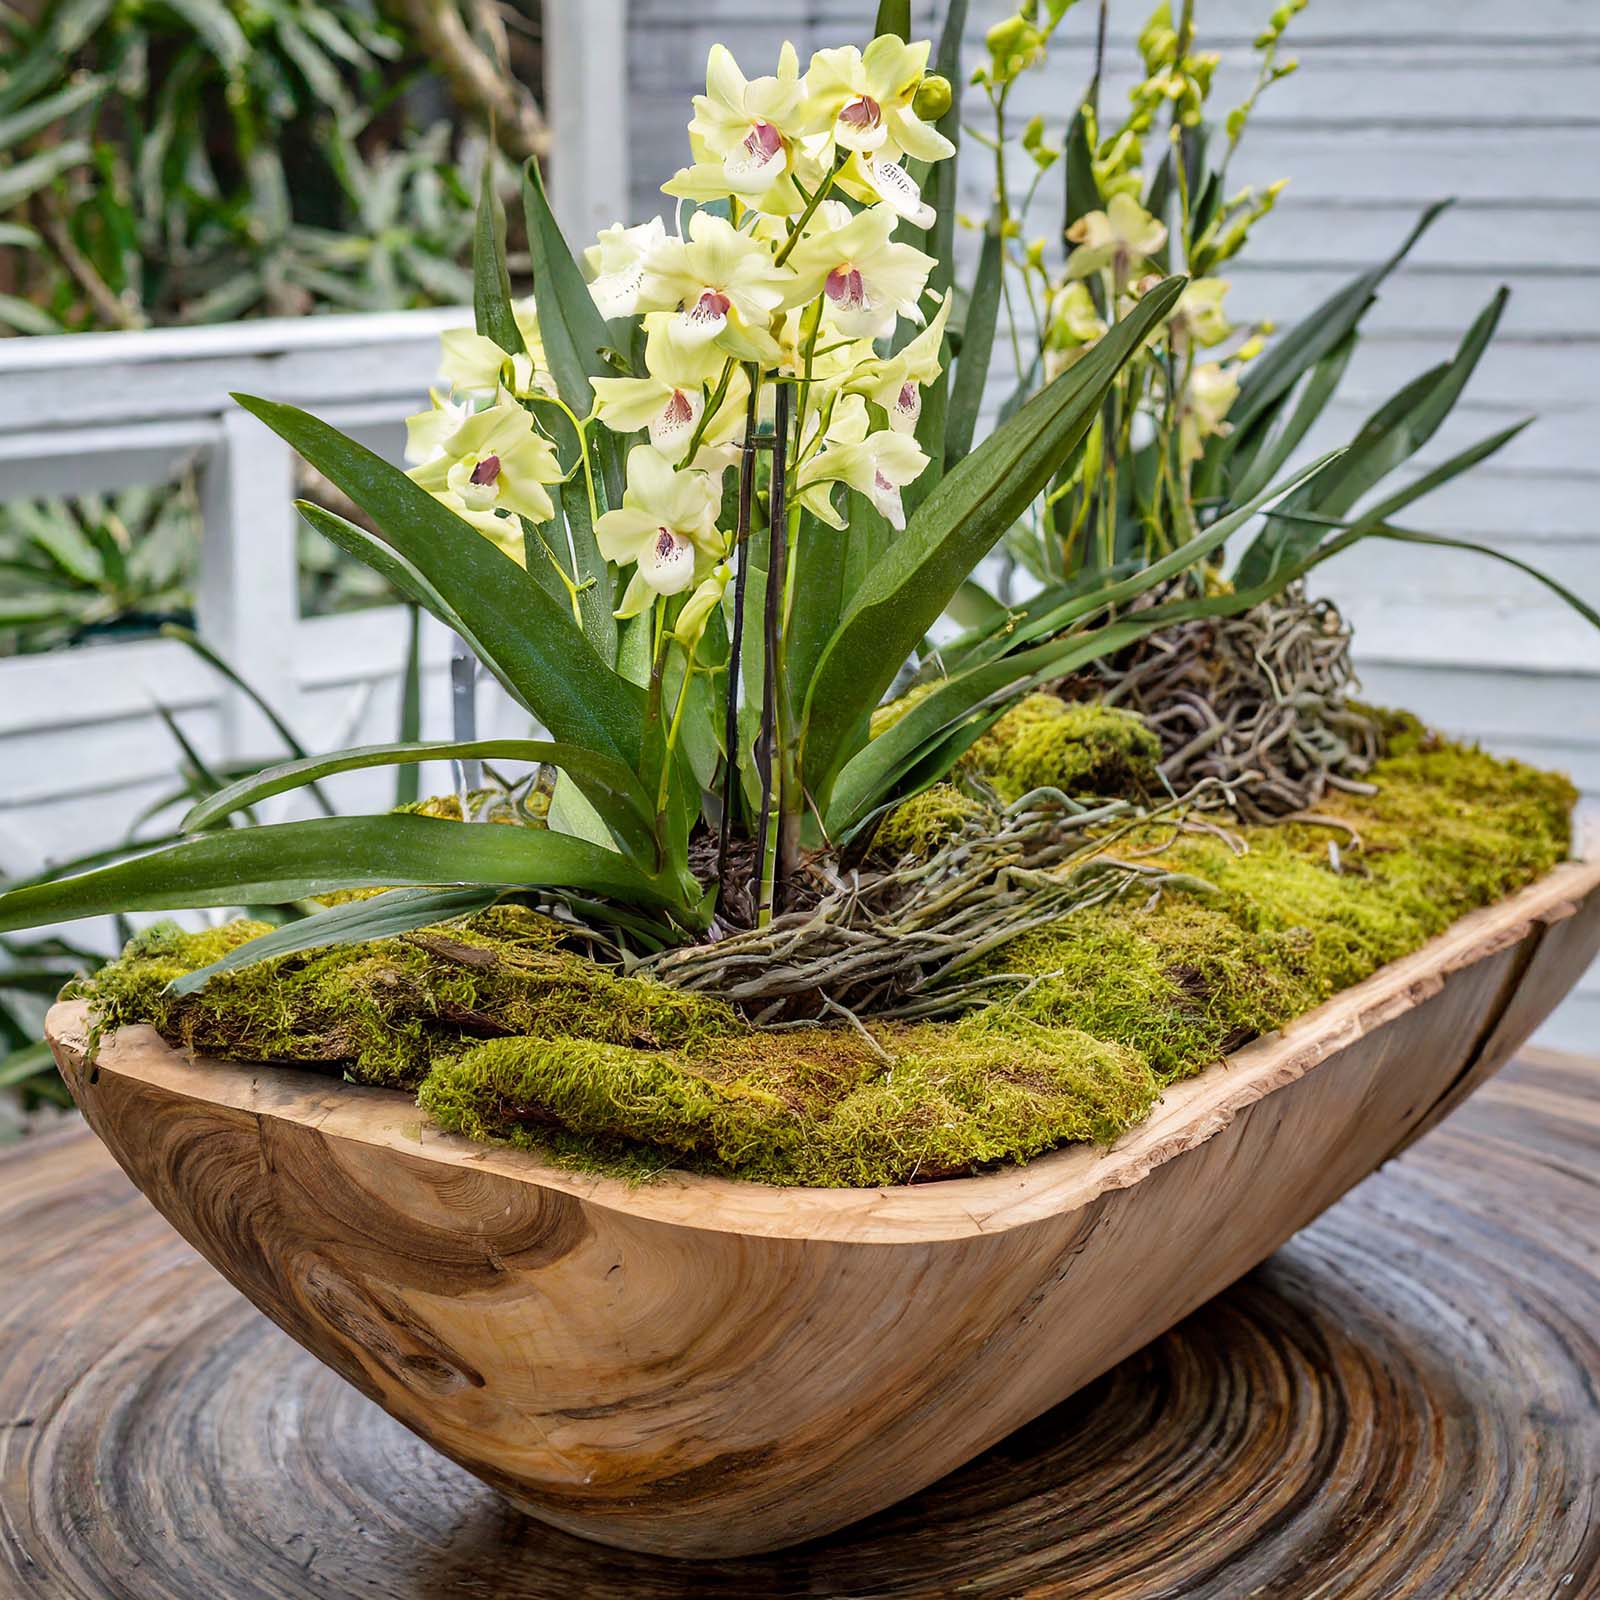 Wooden dough bowl filled with yellow orchids and moss on wooden table outdoors.